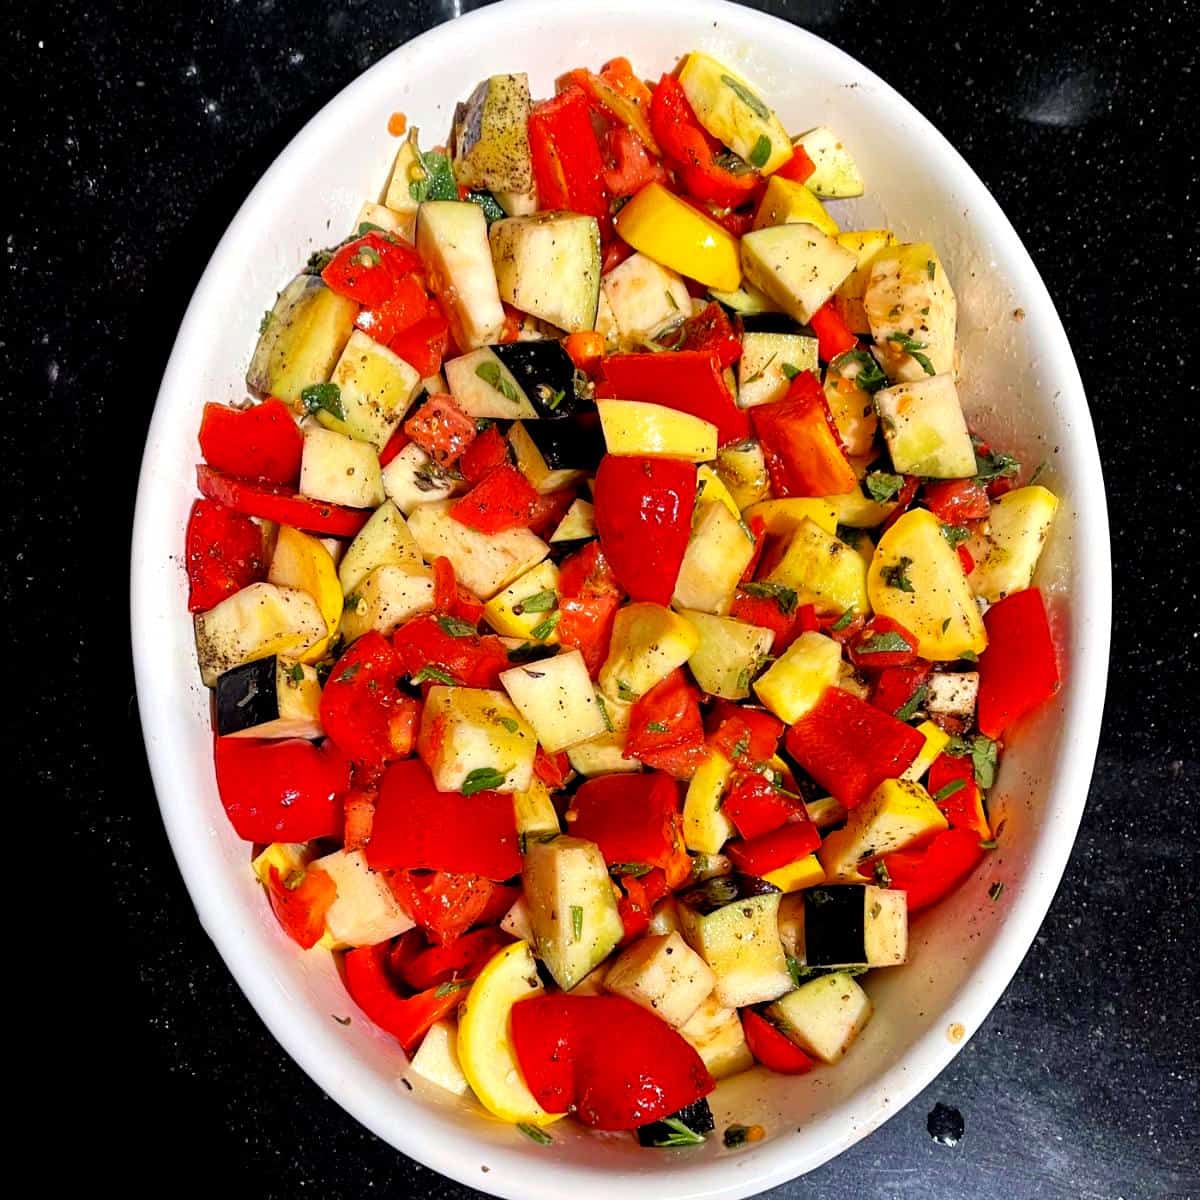 Vegetables for ratatouille mixed with olive oil and herbs in baking dish.